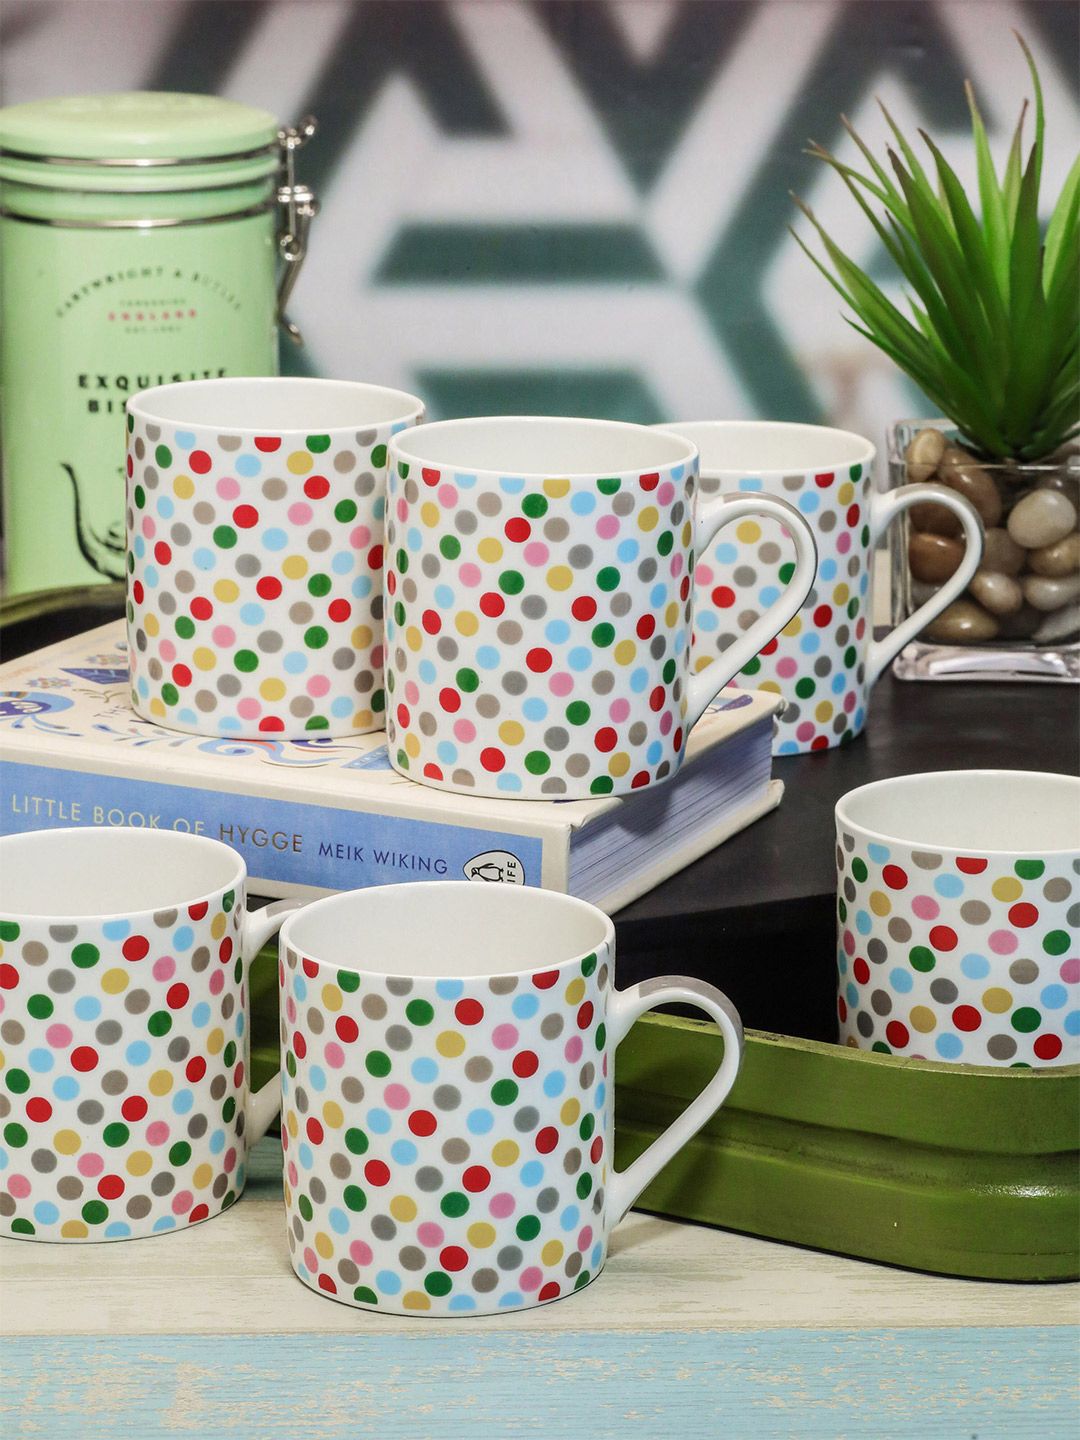 GOODHOMES White & Green Floral Printed Bone China Glossy Mugs Set of Cups and Mugs Price in India